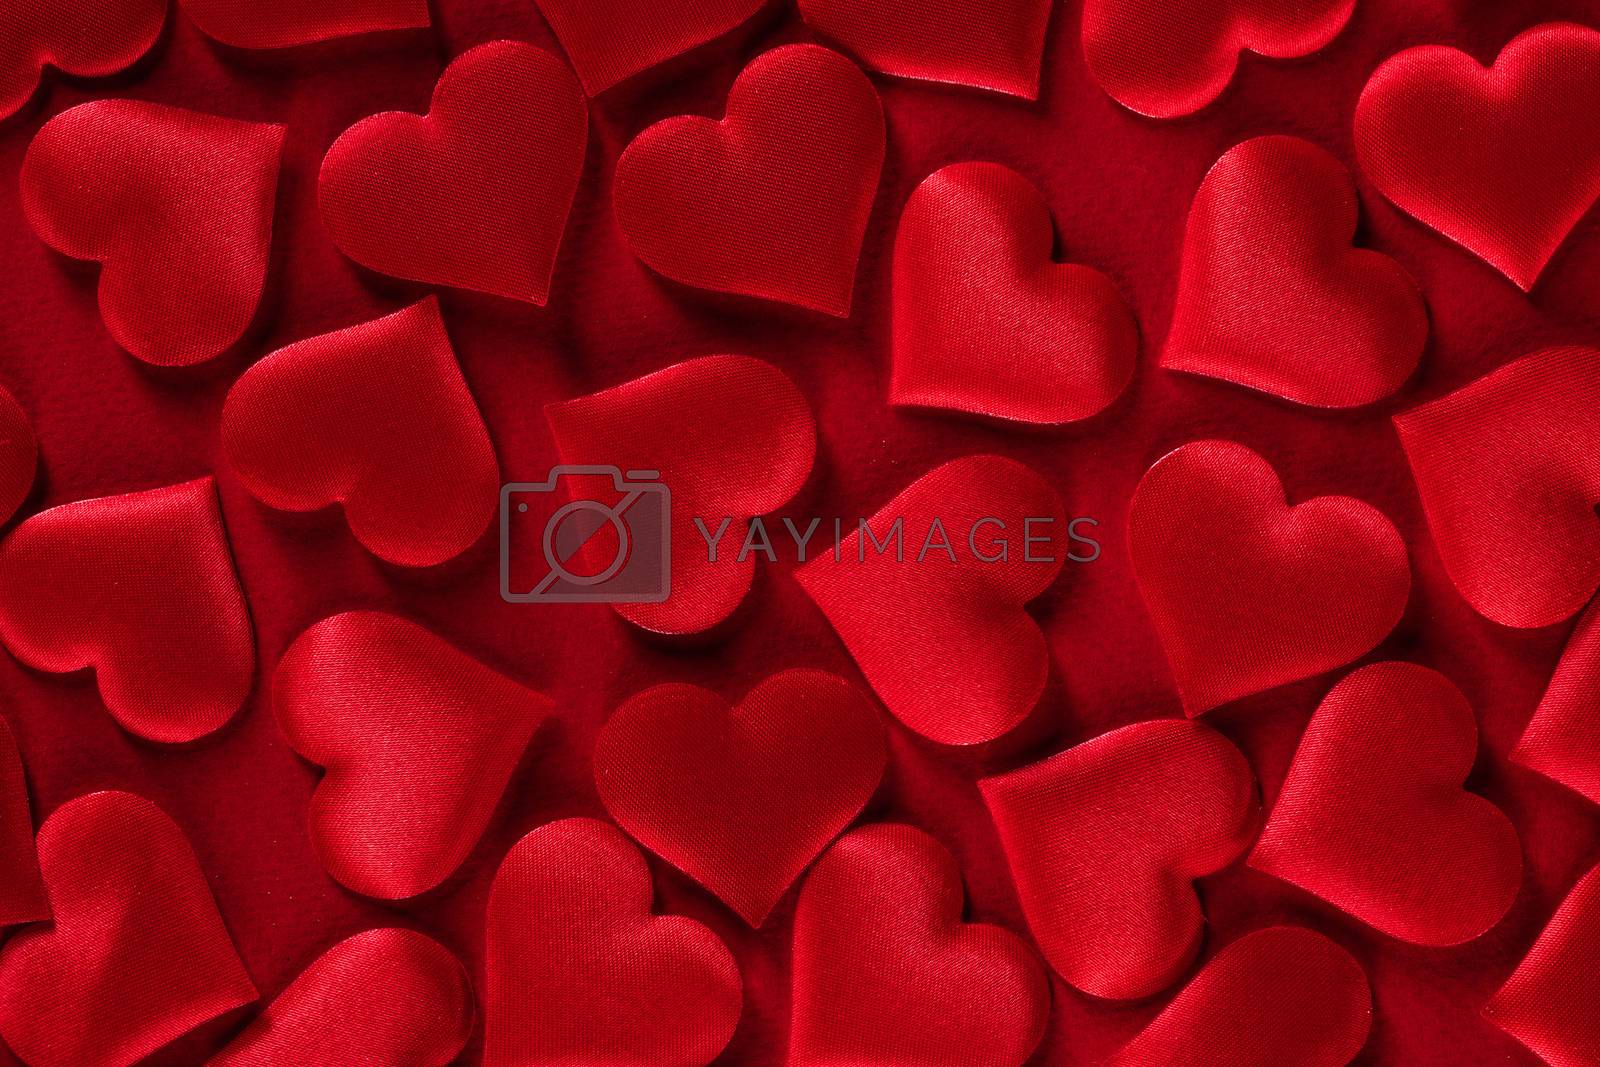 Royalty free image of Valentines day hearts background by Yellowj